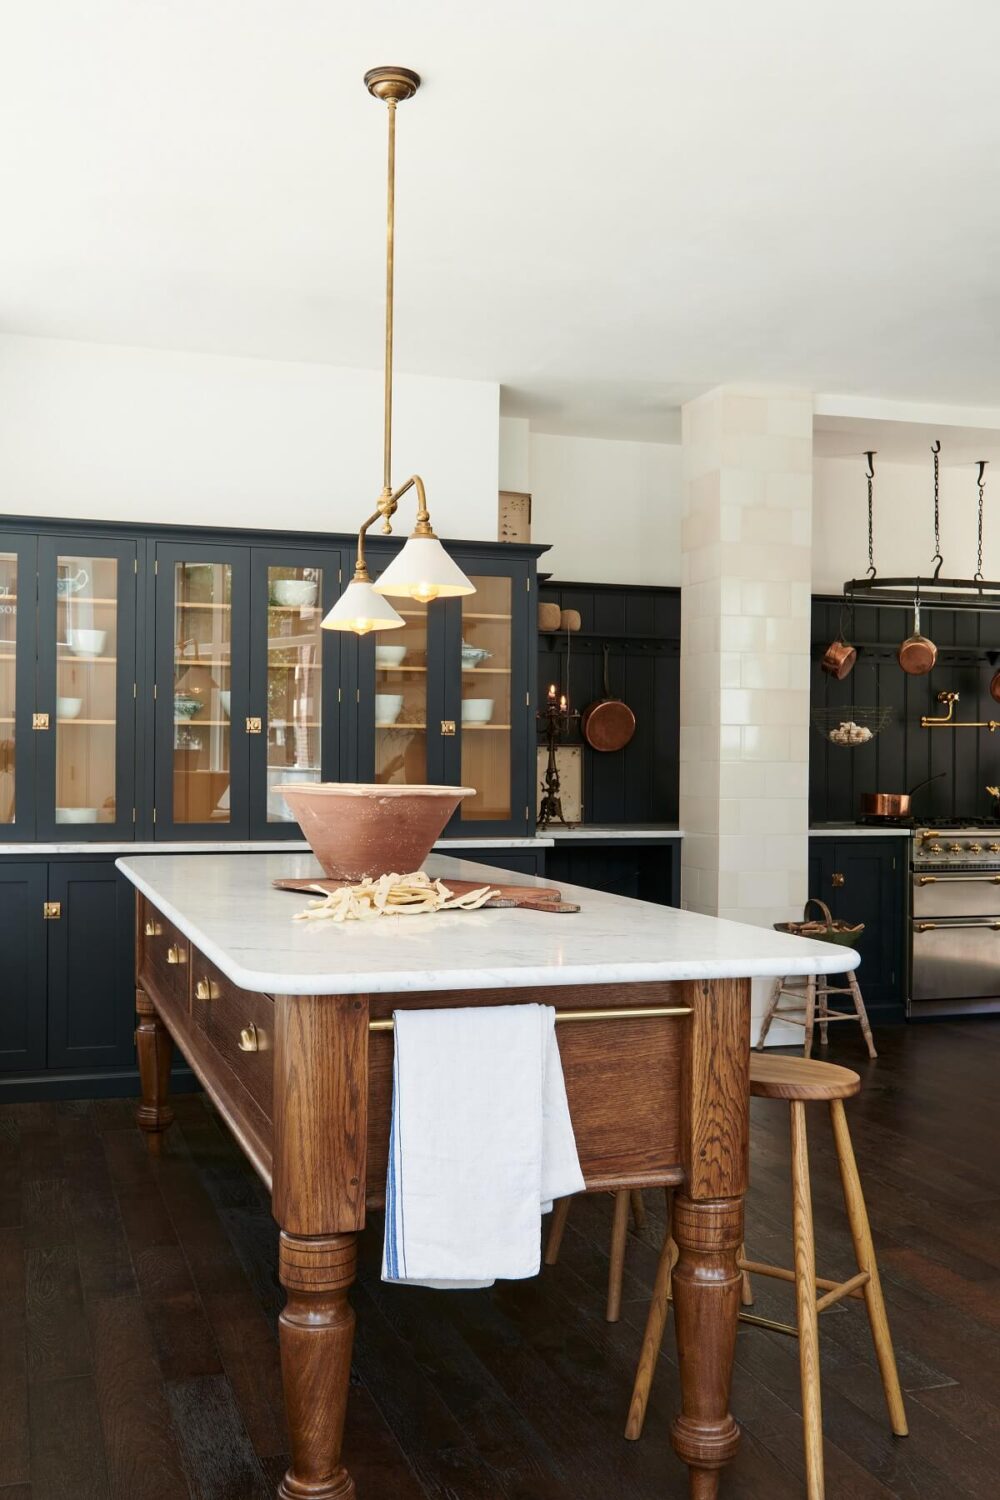 3.TheRealShakerKitchen deVOL LOW RES A Warm Makeover For A deVOL Shaker Kitchen